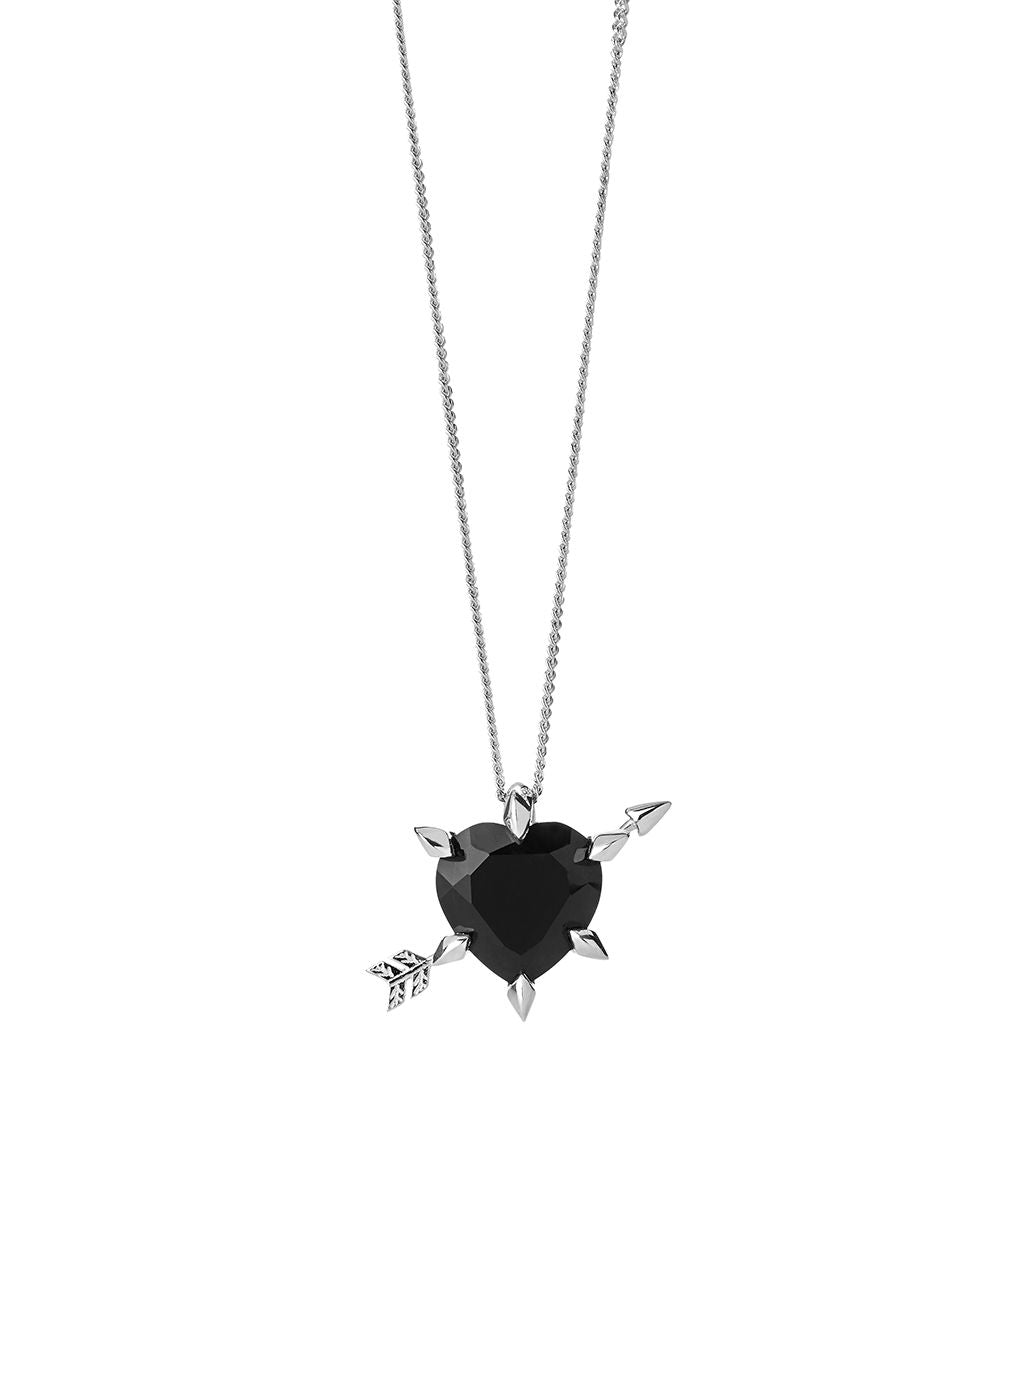 Sterling Silver and Onyx Arrow and Heart Karen Walker Necklace